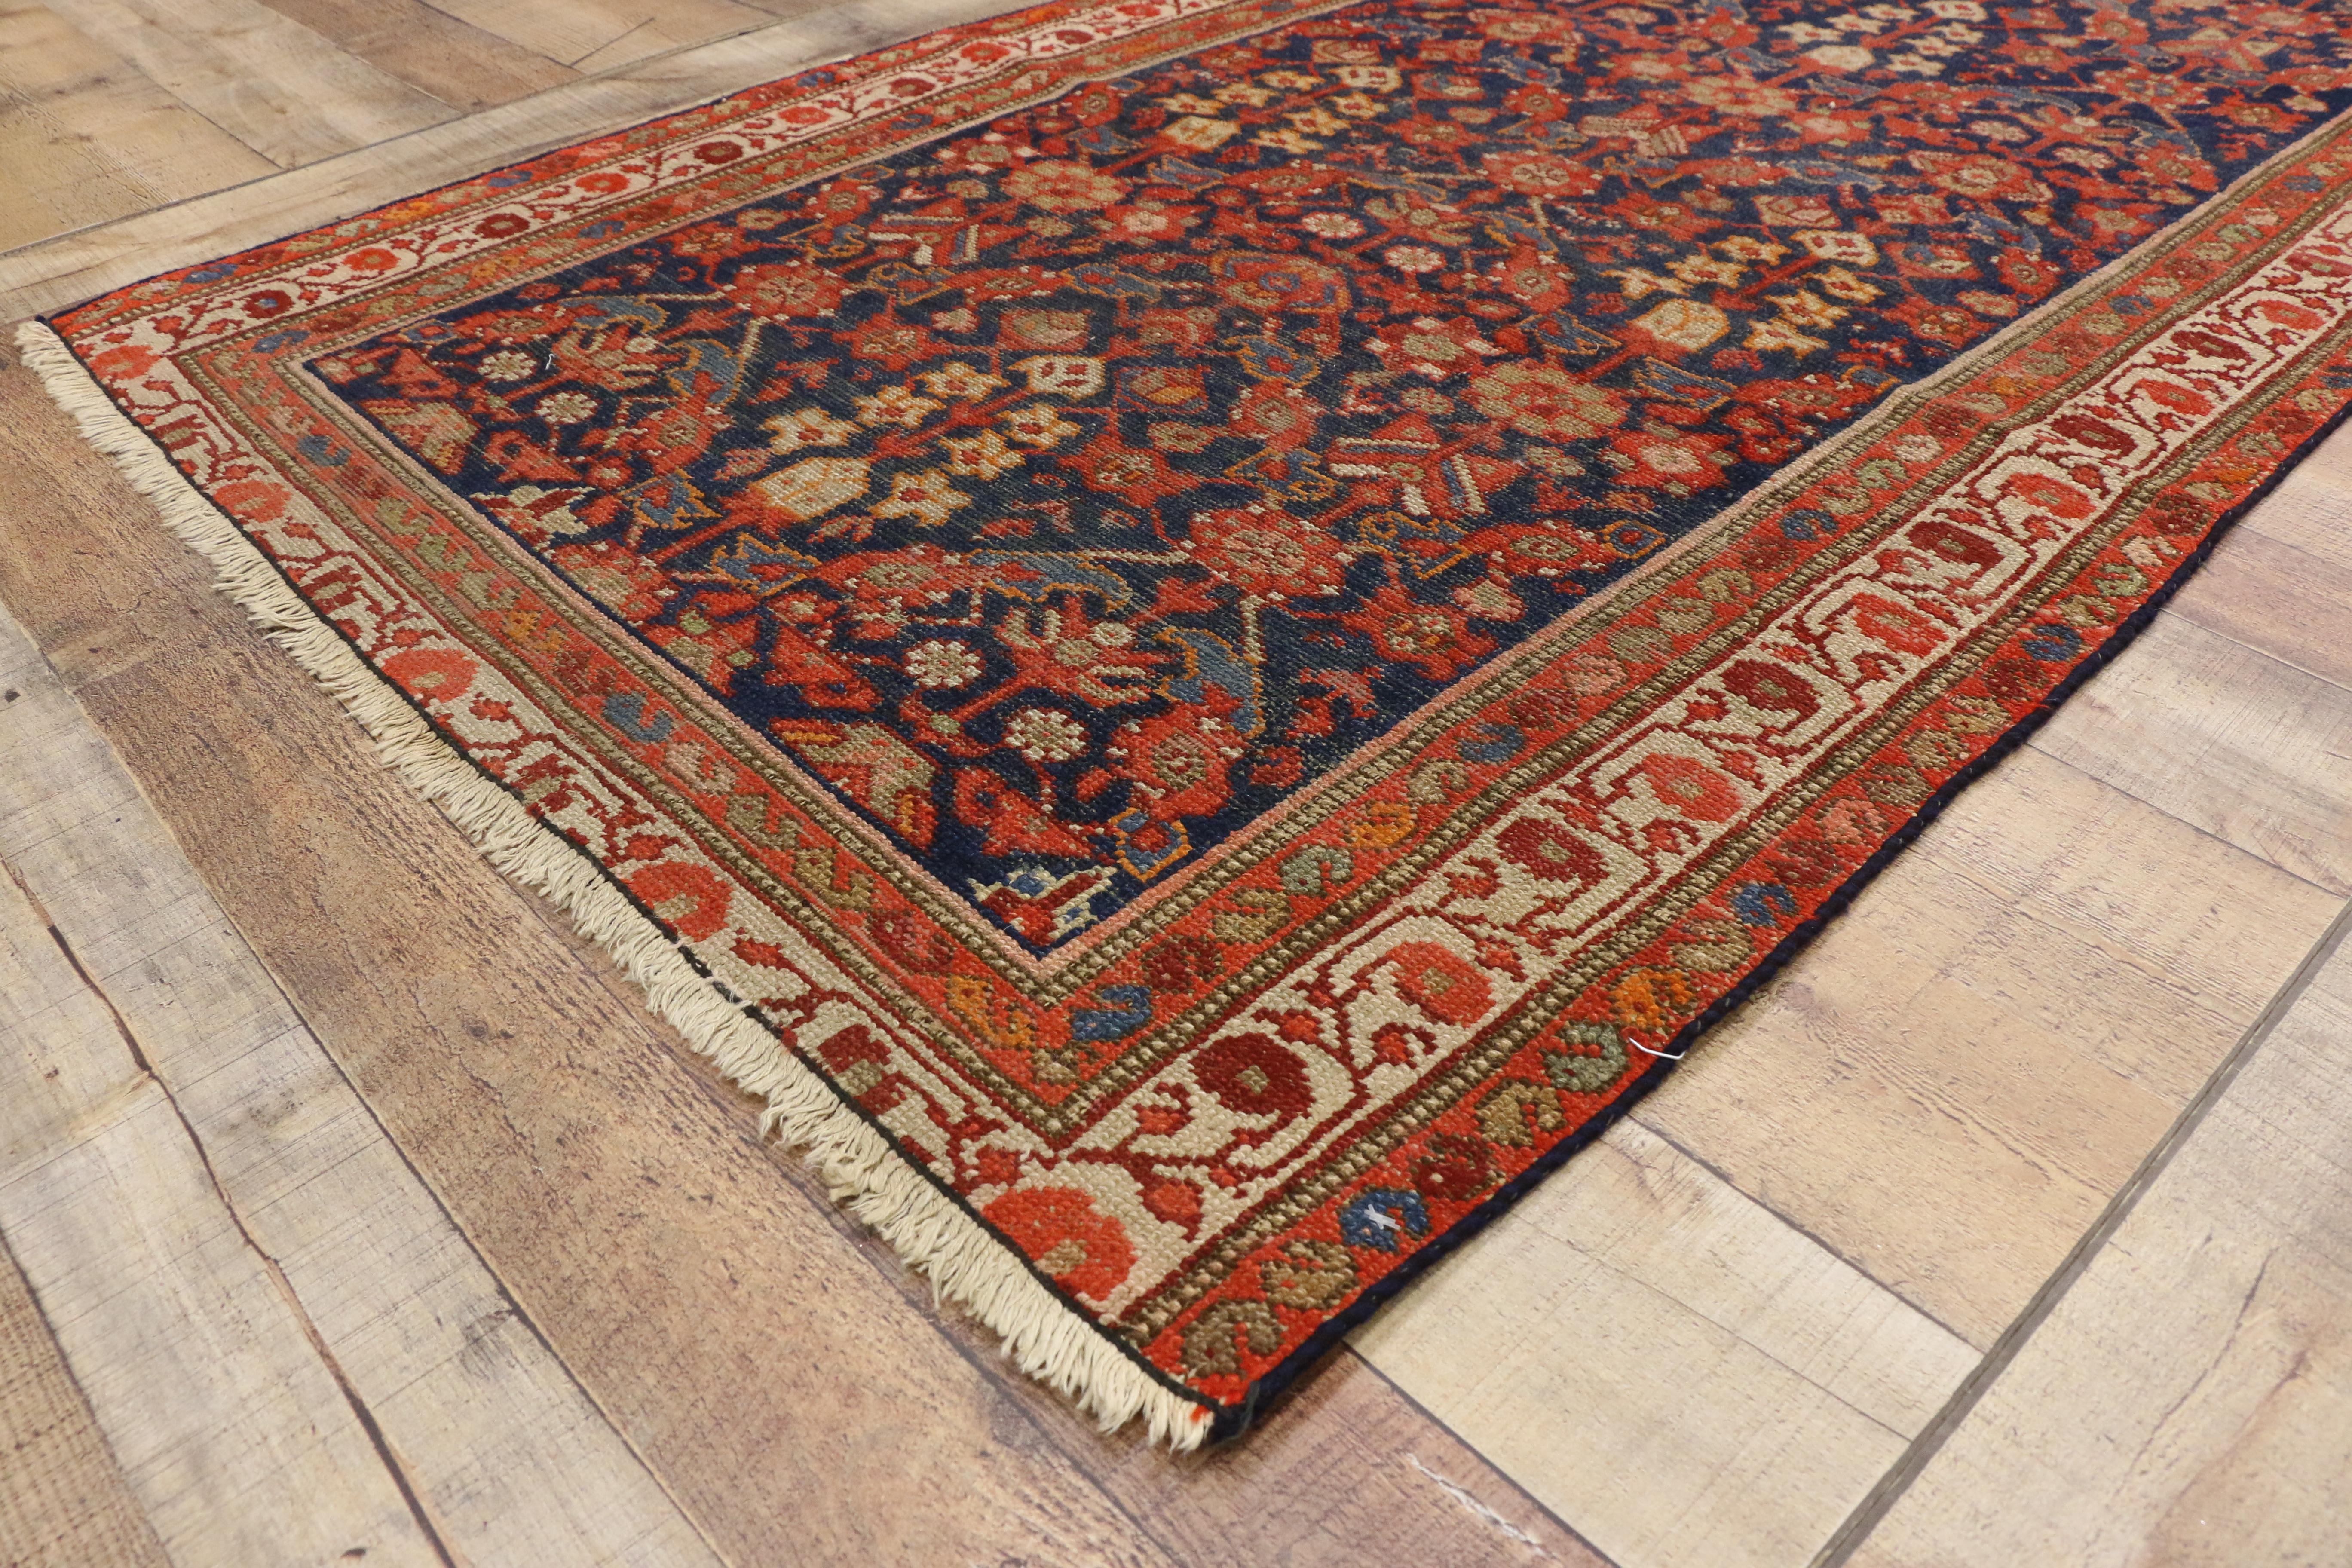 73482 Arts & Crafts style distressed antique Persian Malayer runner, hallway runner. Richly ornamented and brilliantly hued, this hand-knotted wool antique Persian Malayer runner features a timeless, traditional style composed of the Guli Henna